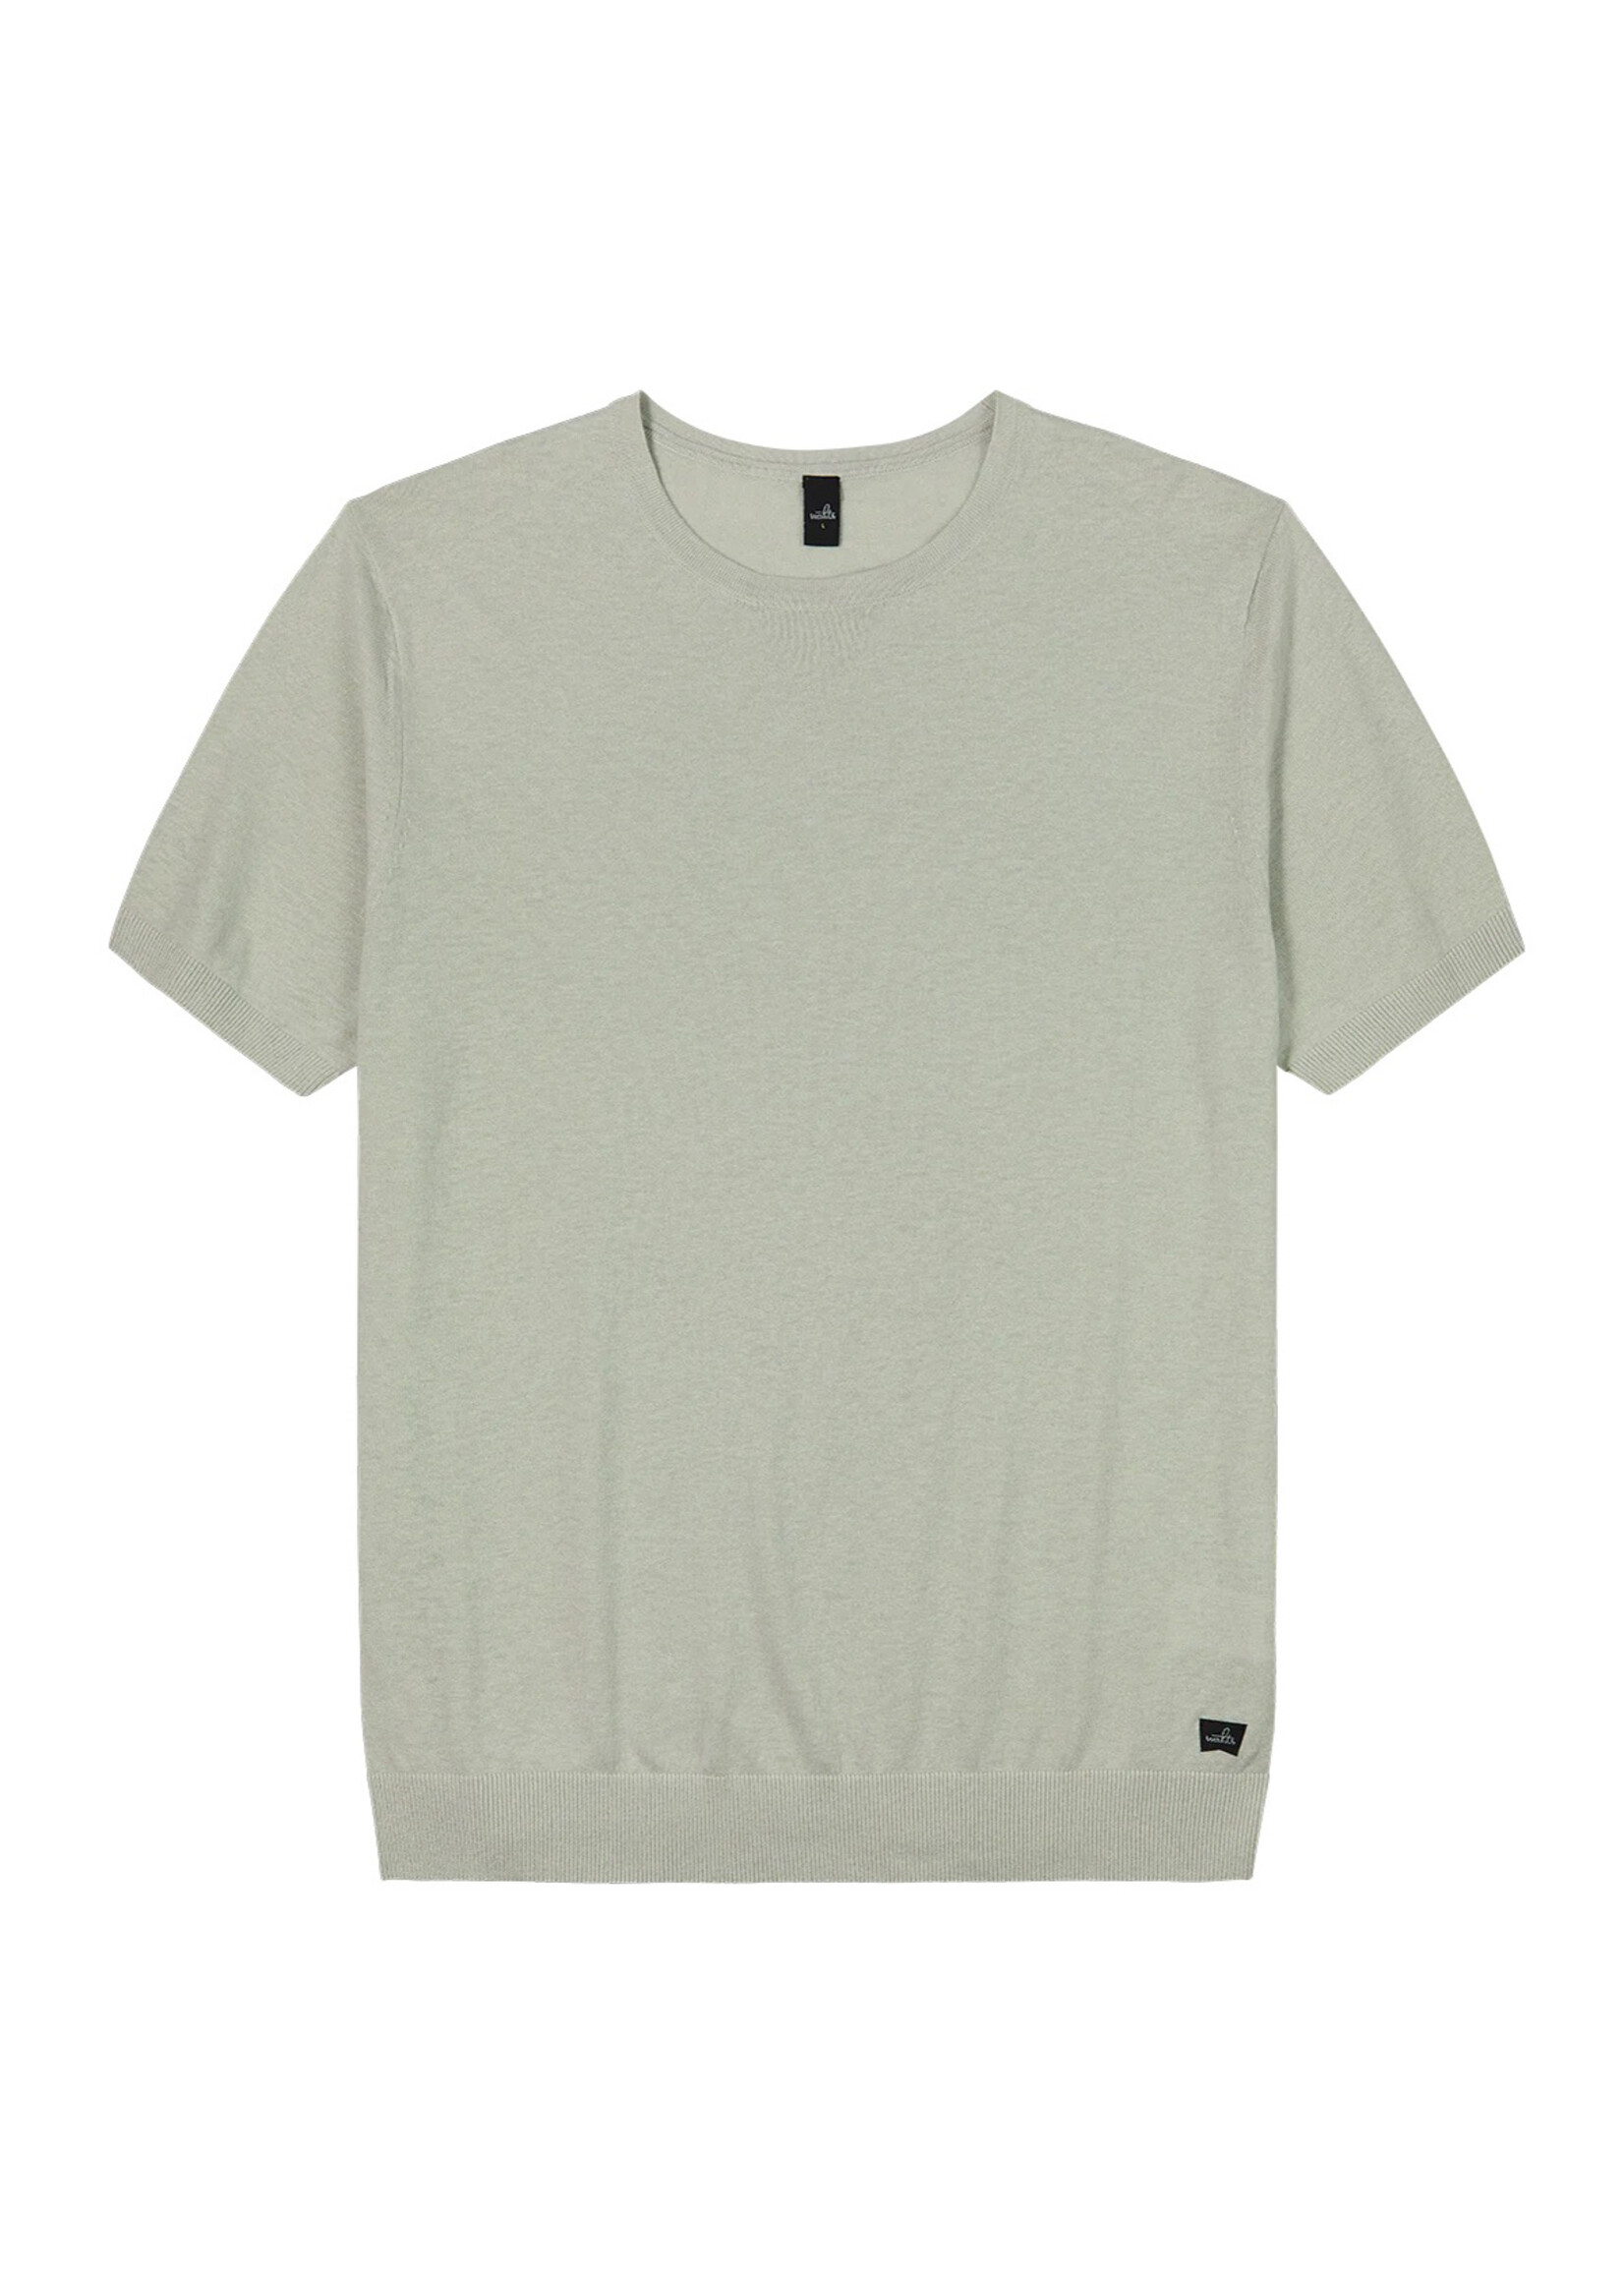 Wahts Miles Cotton Linen Knitted T-Shirt Light Sage Green